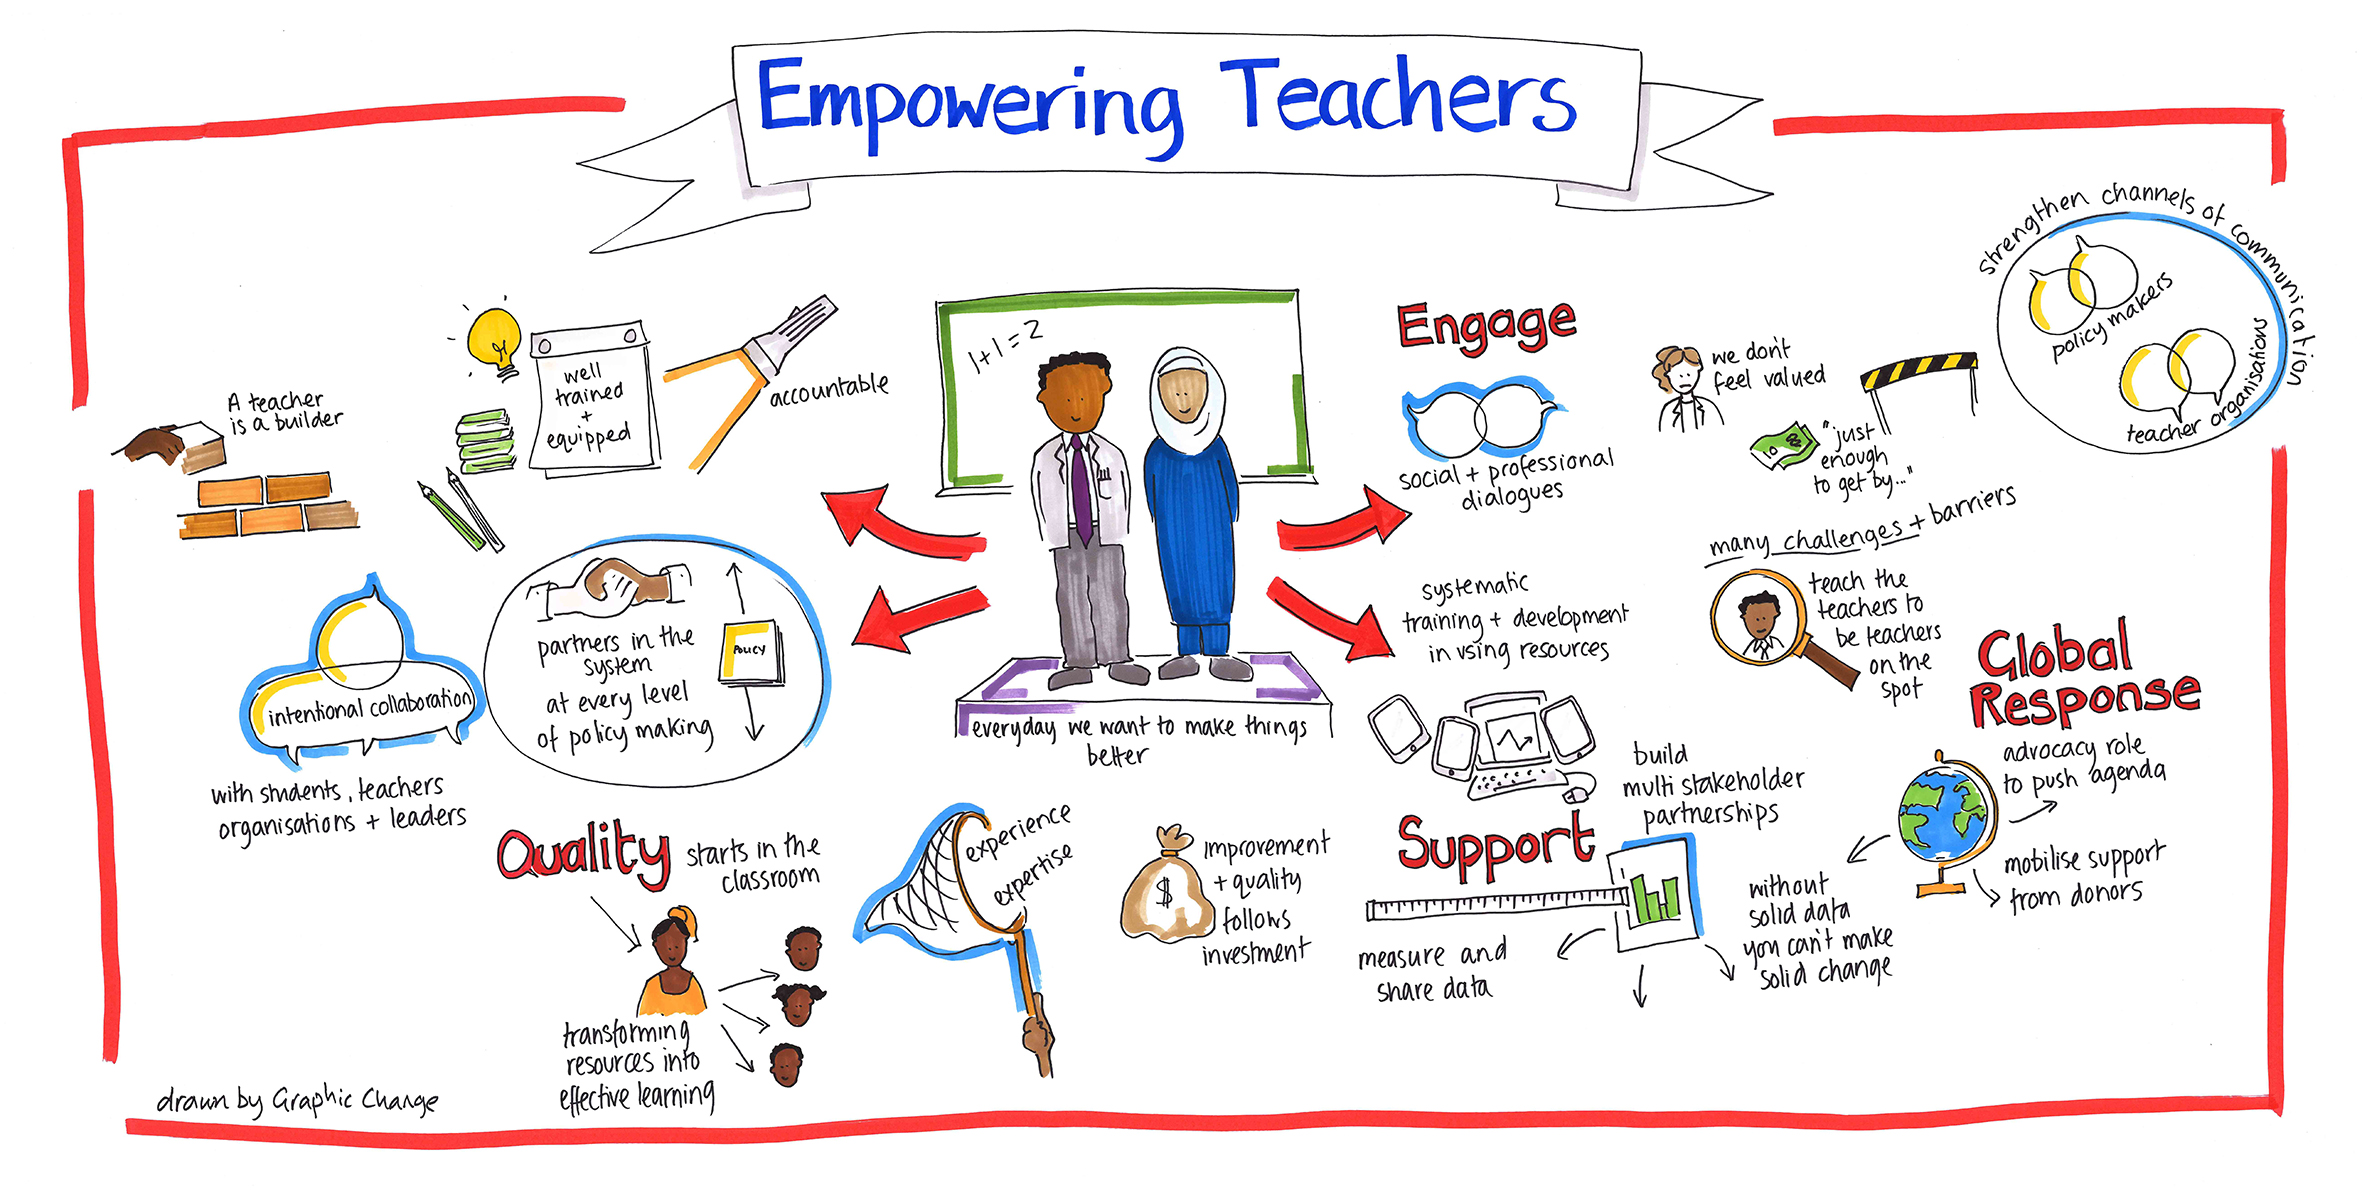 An invitation to join Empowering Teachers Through VideoReView